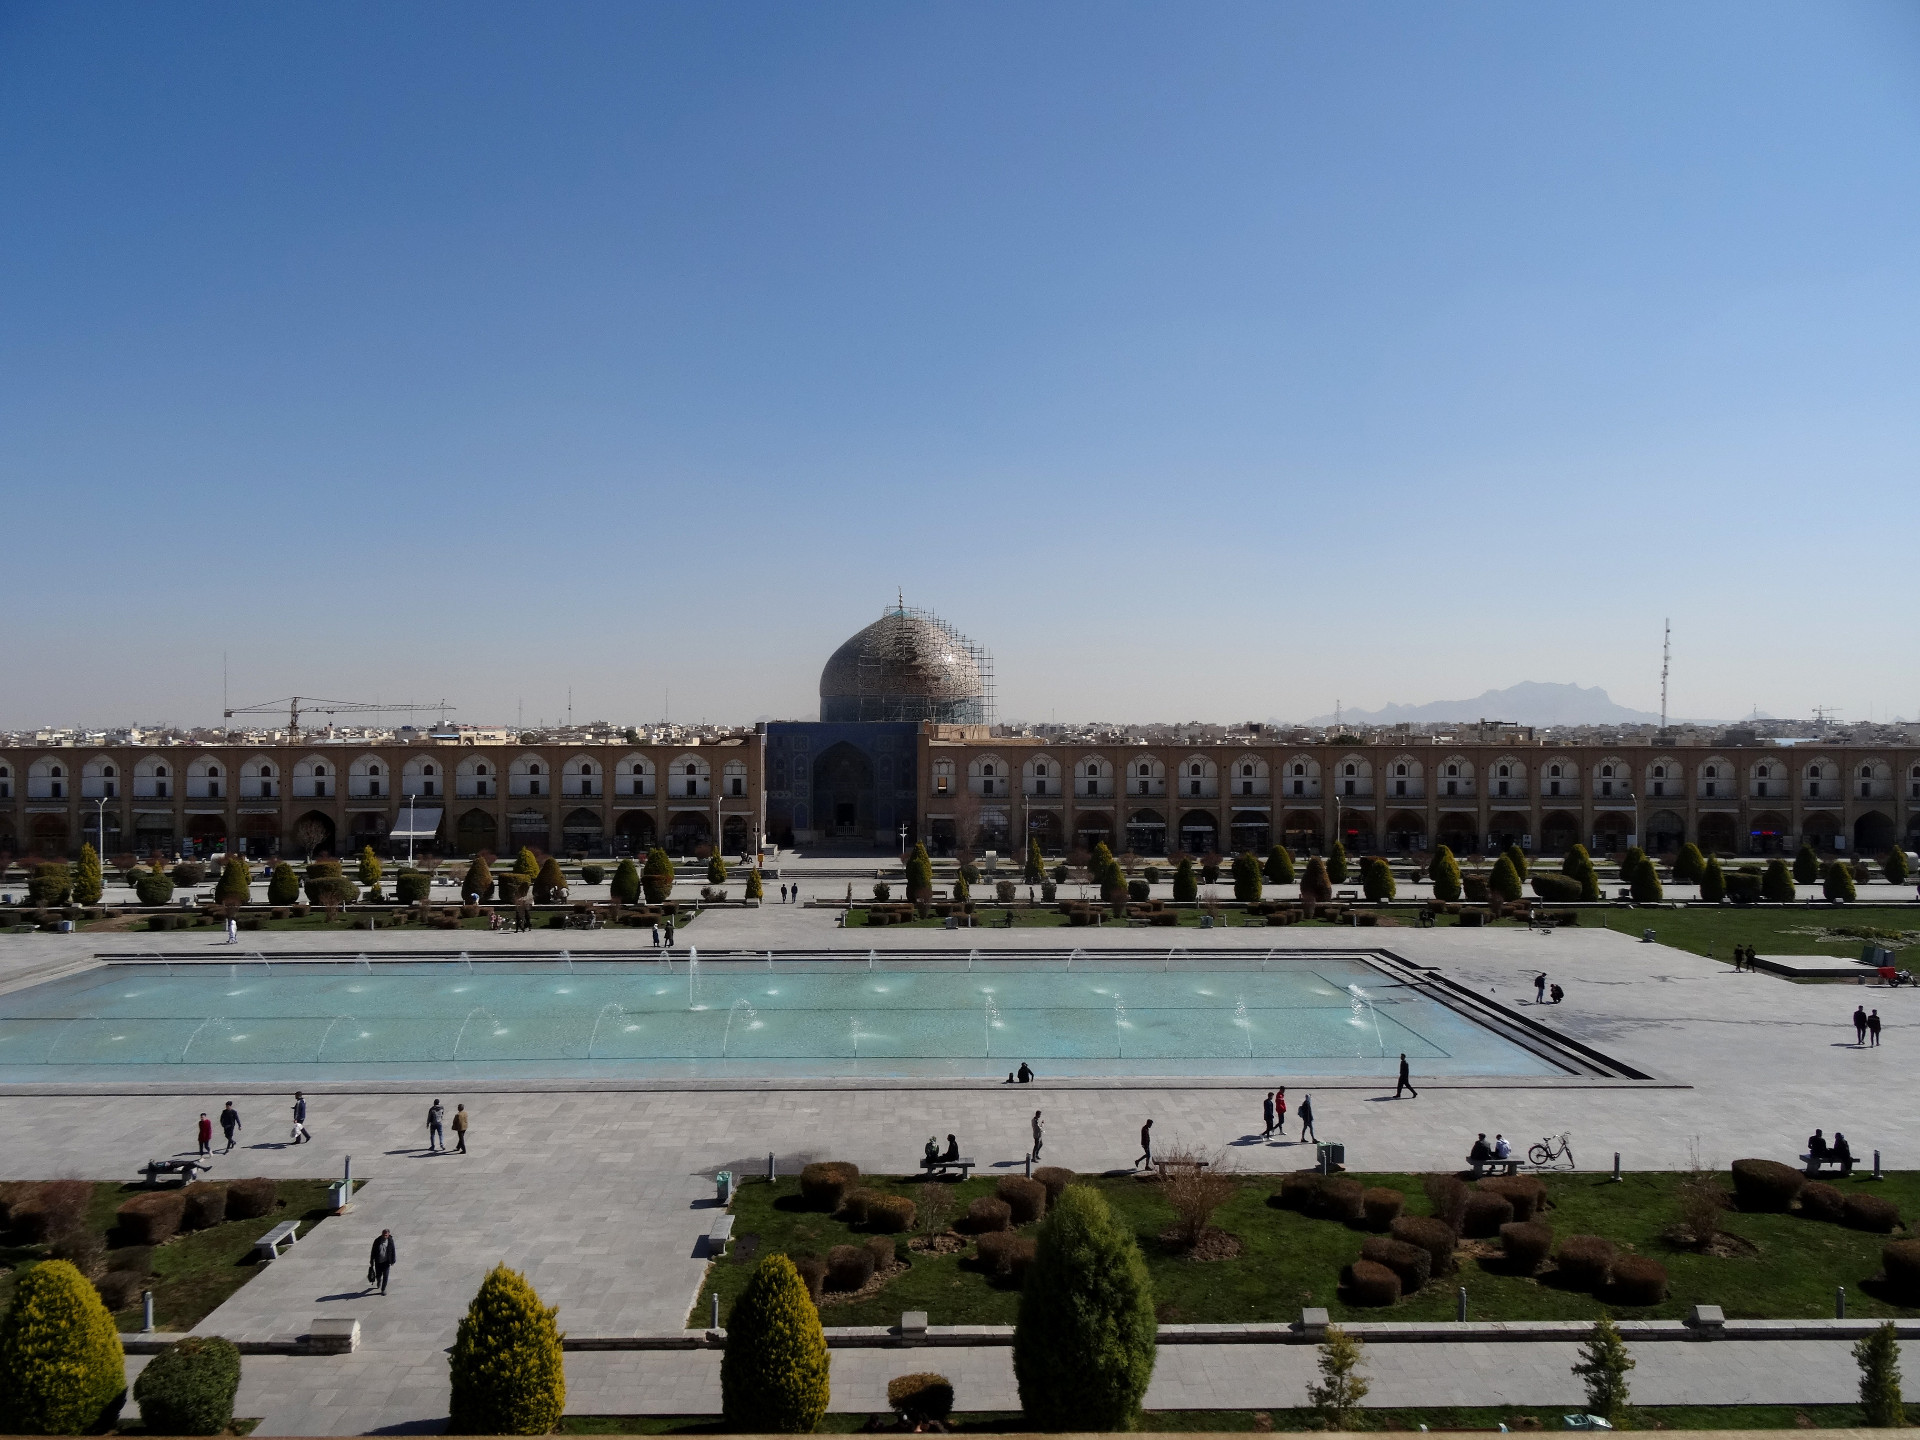 View from the terrace of Ali Qapu Palace to Naqsh-e-Jahan Square - Naqsh-e-Jahan means "image of the world"